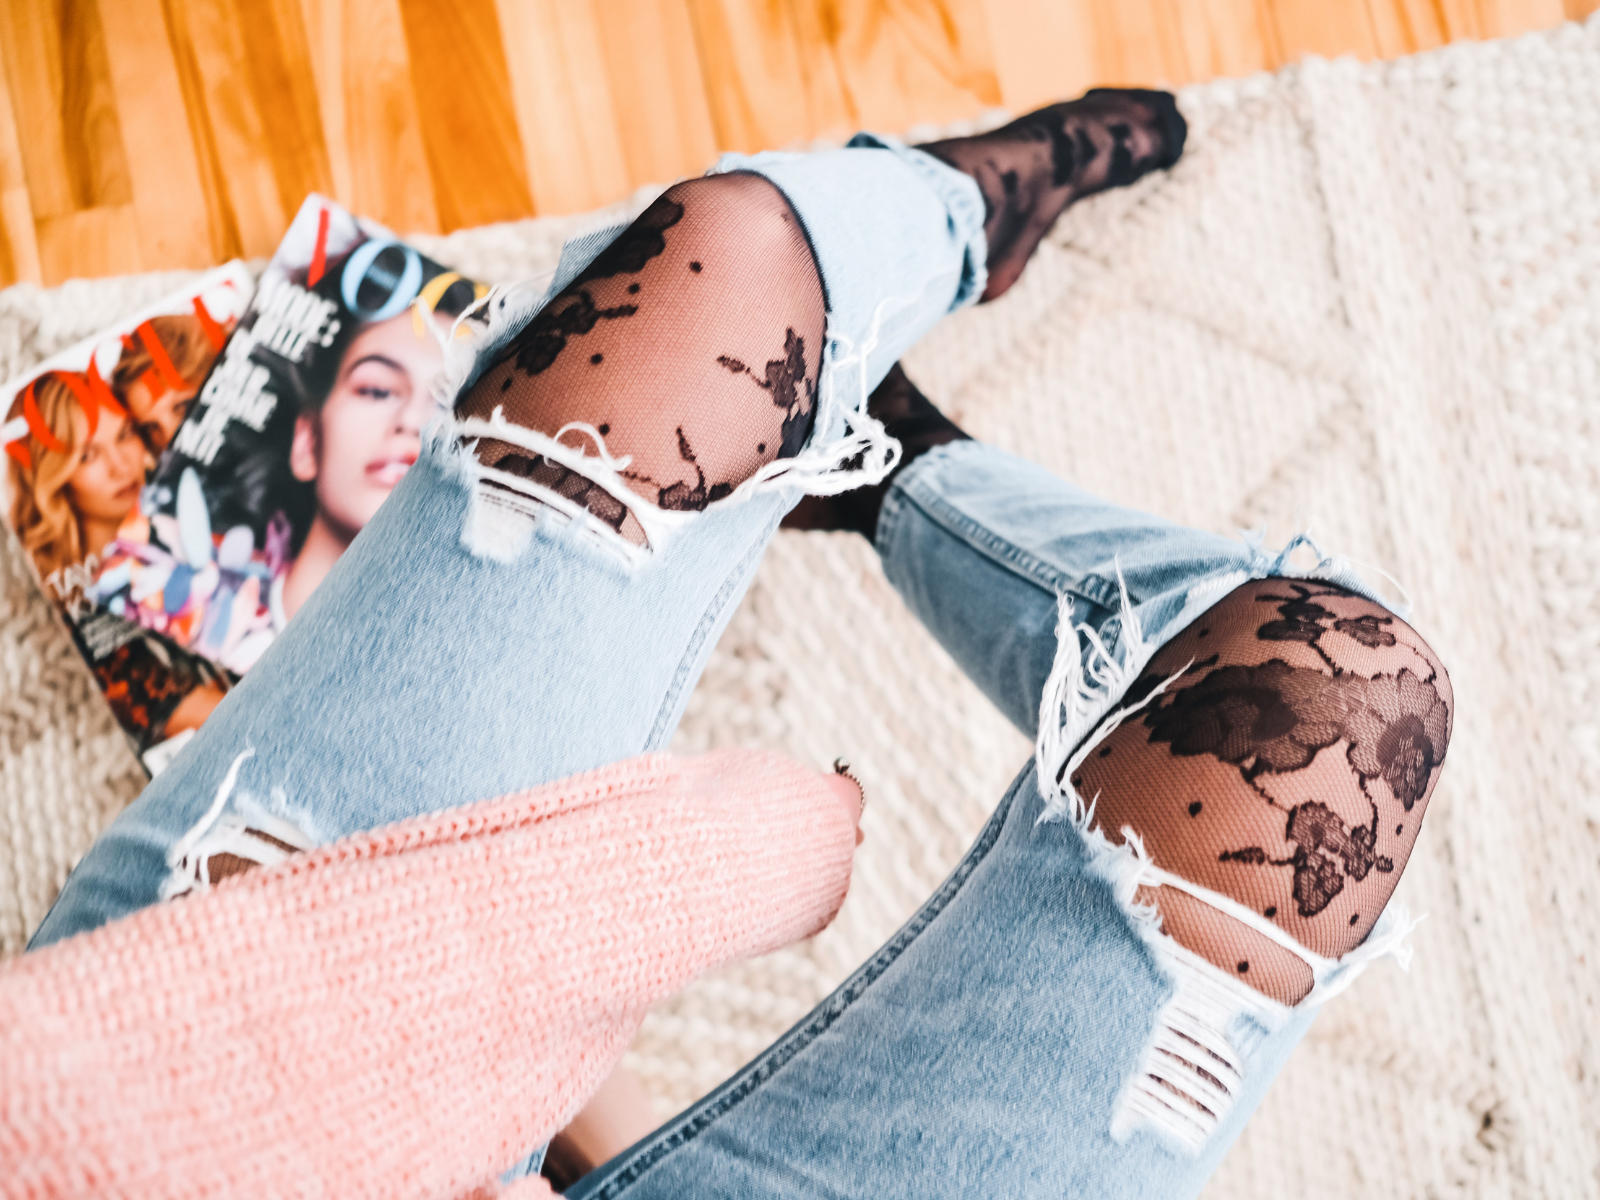 How to Wear Tights Under Ripped Jeans – From Rachel